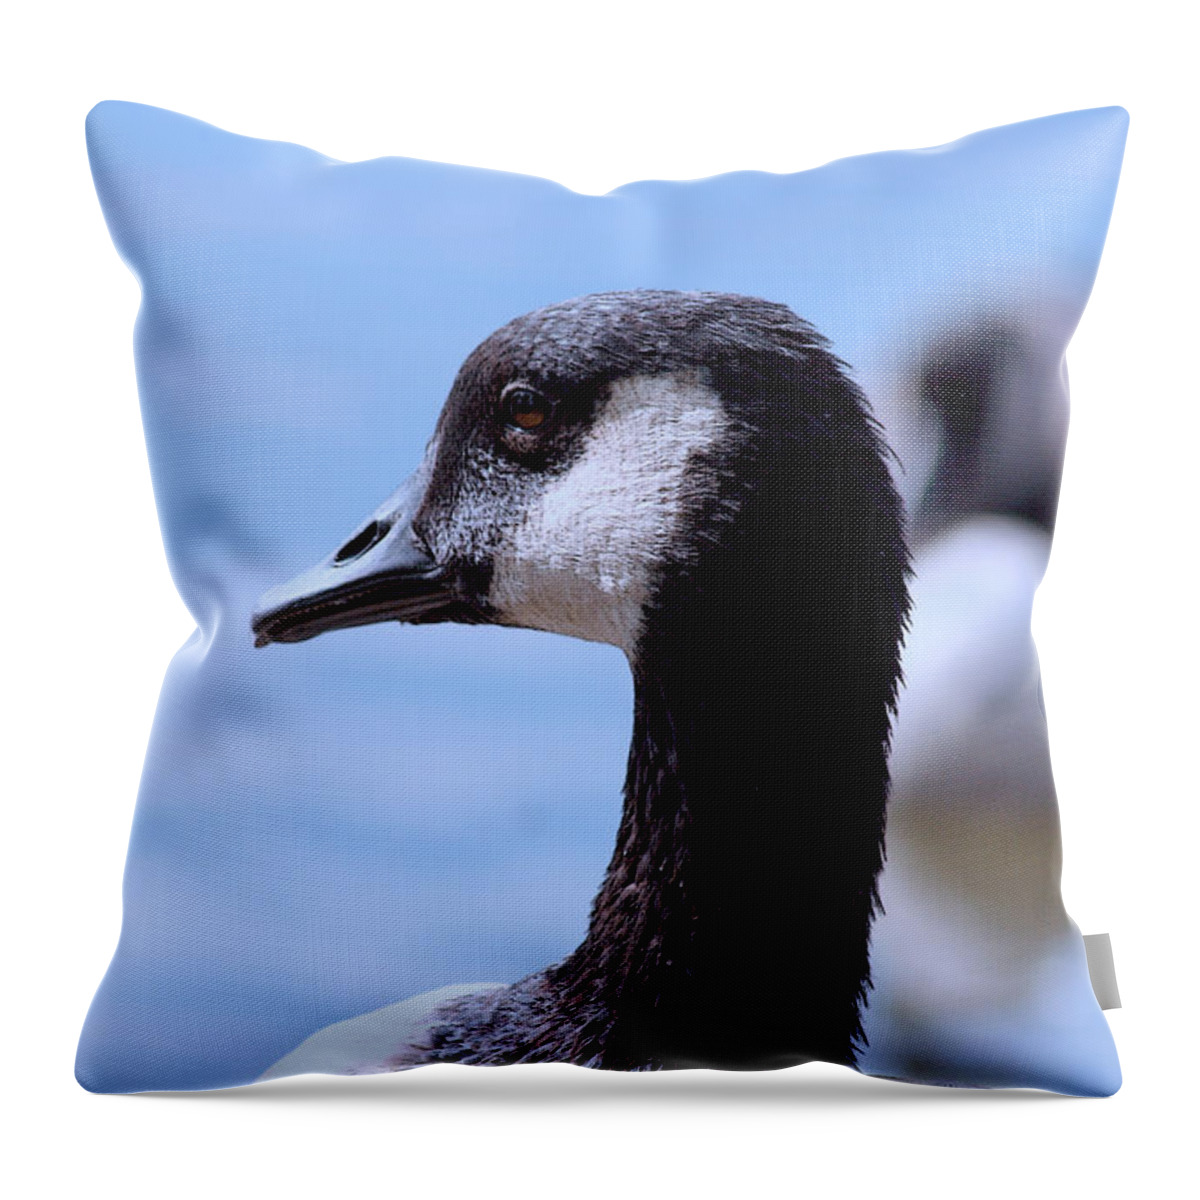 Canadian Goose Throw Pillow featuring the photograph Goose Portrait by Lesa Fine